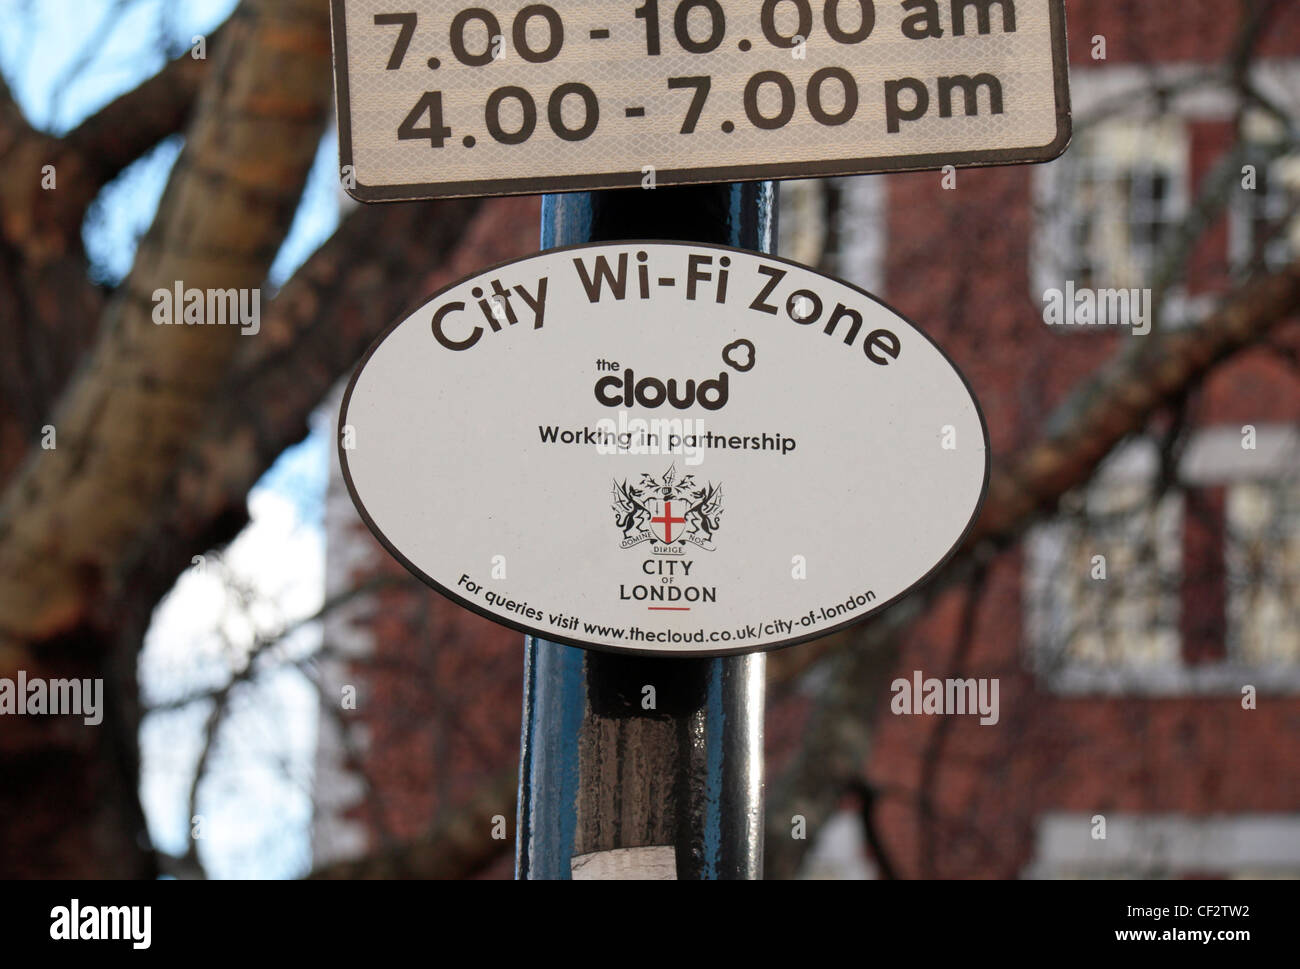 Sign indicating a City wi-fi zone (accessing 'The Cloud') in the City of London, England. Stock Photo